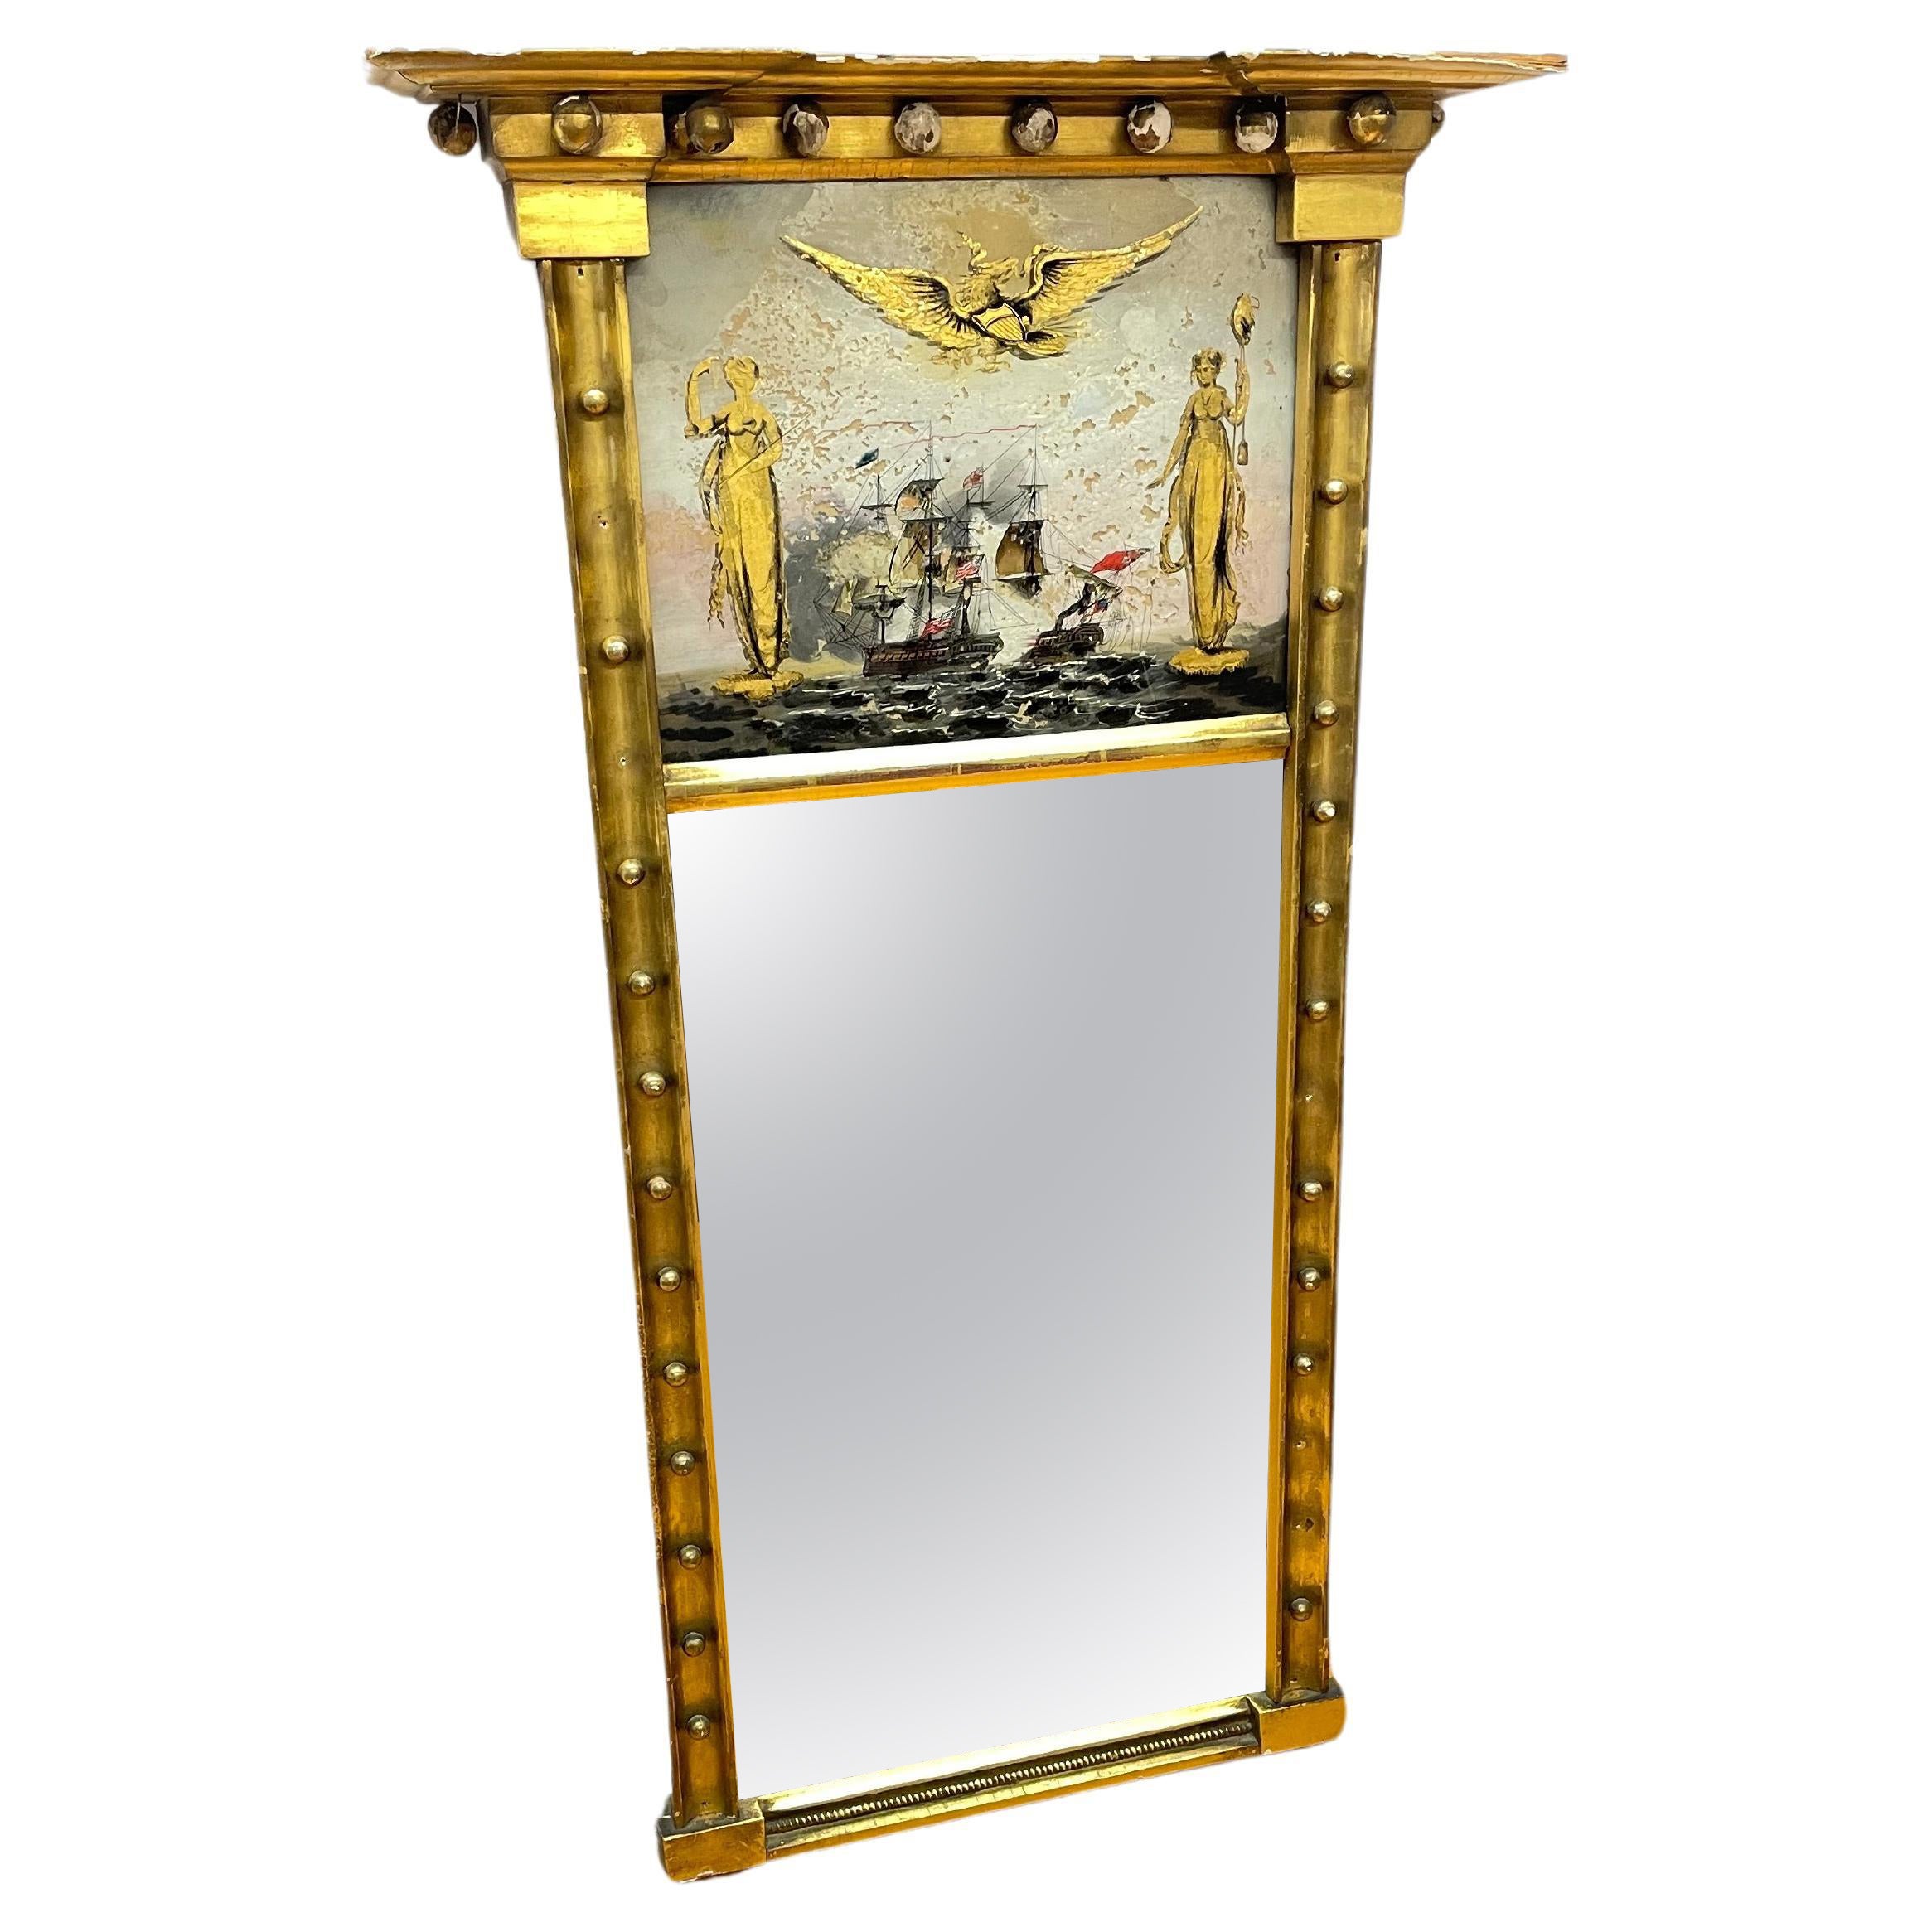 Federal. Trumeau Mirror With Reverse Painted Maritime Scene